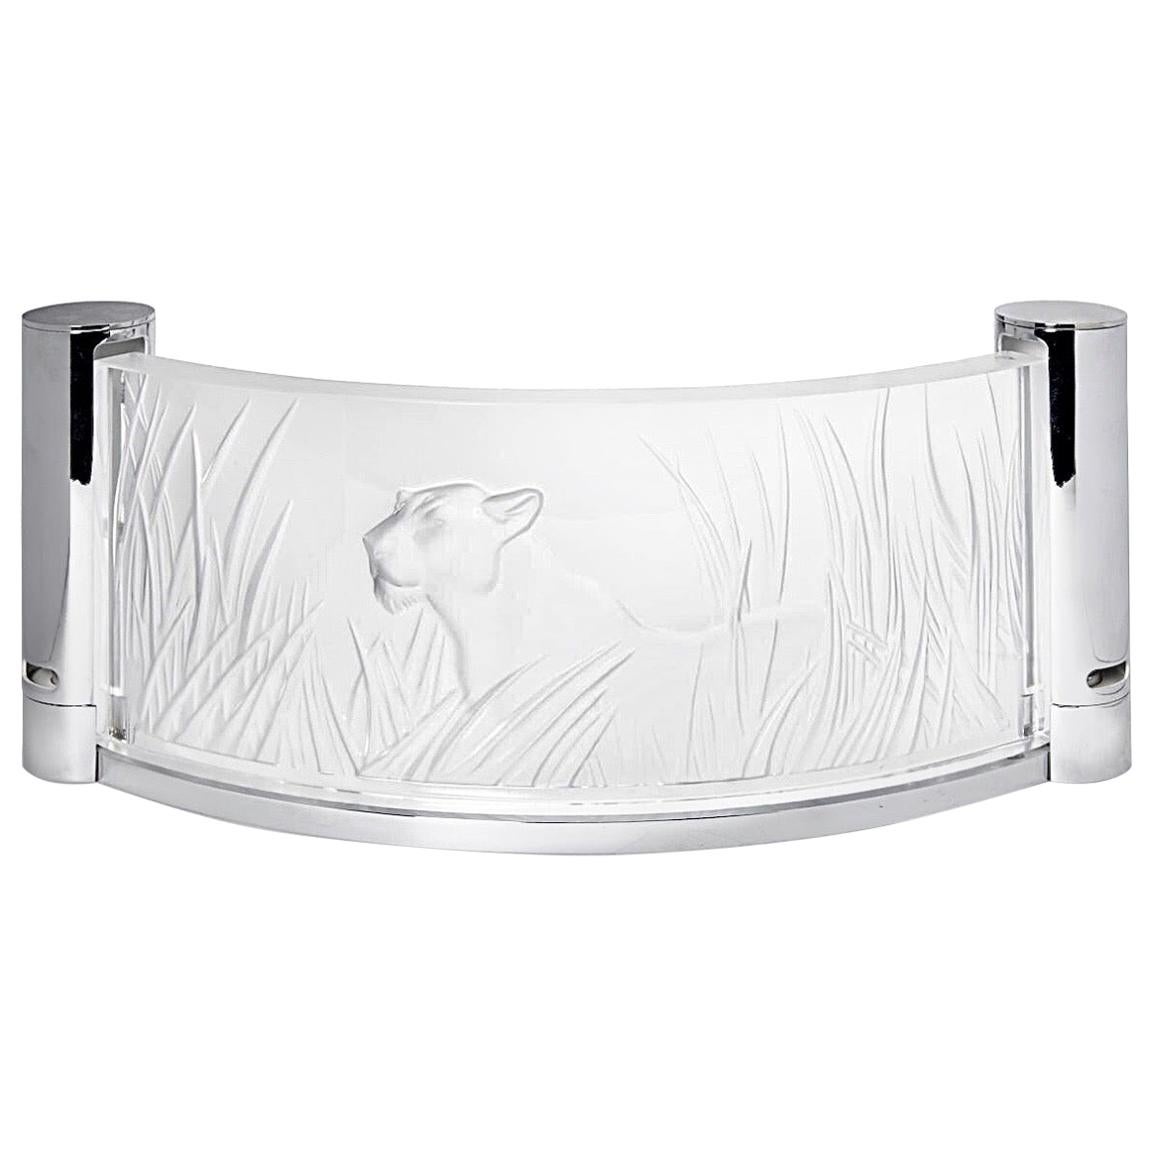 Lalique Kora Large Lioness Crystal Wall Light, Sconce, Chrome Accents, Signed